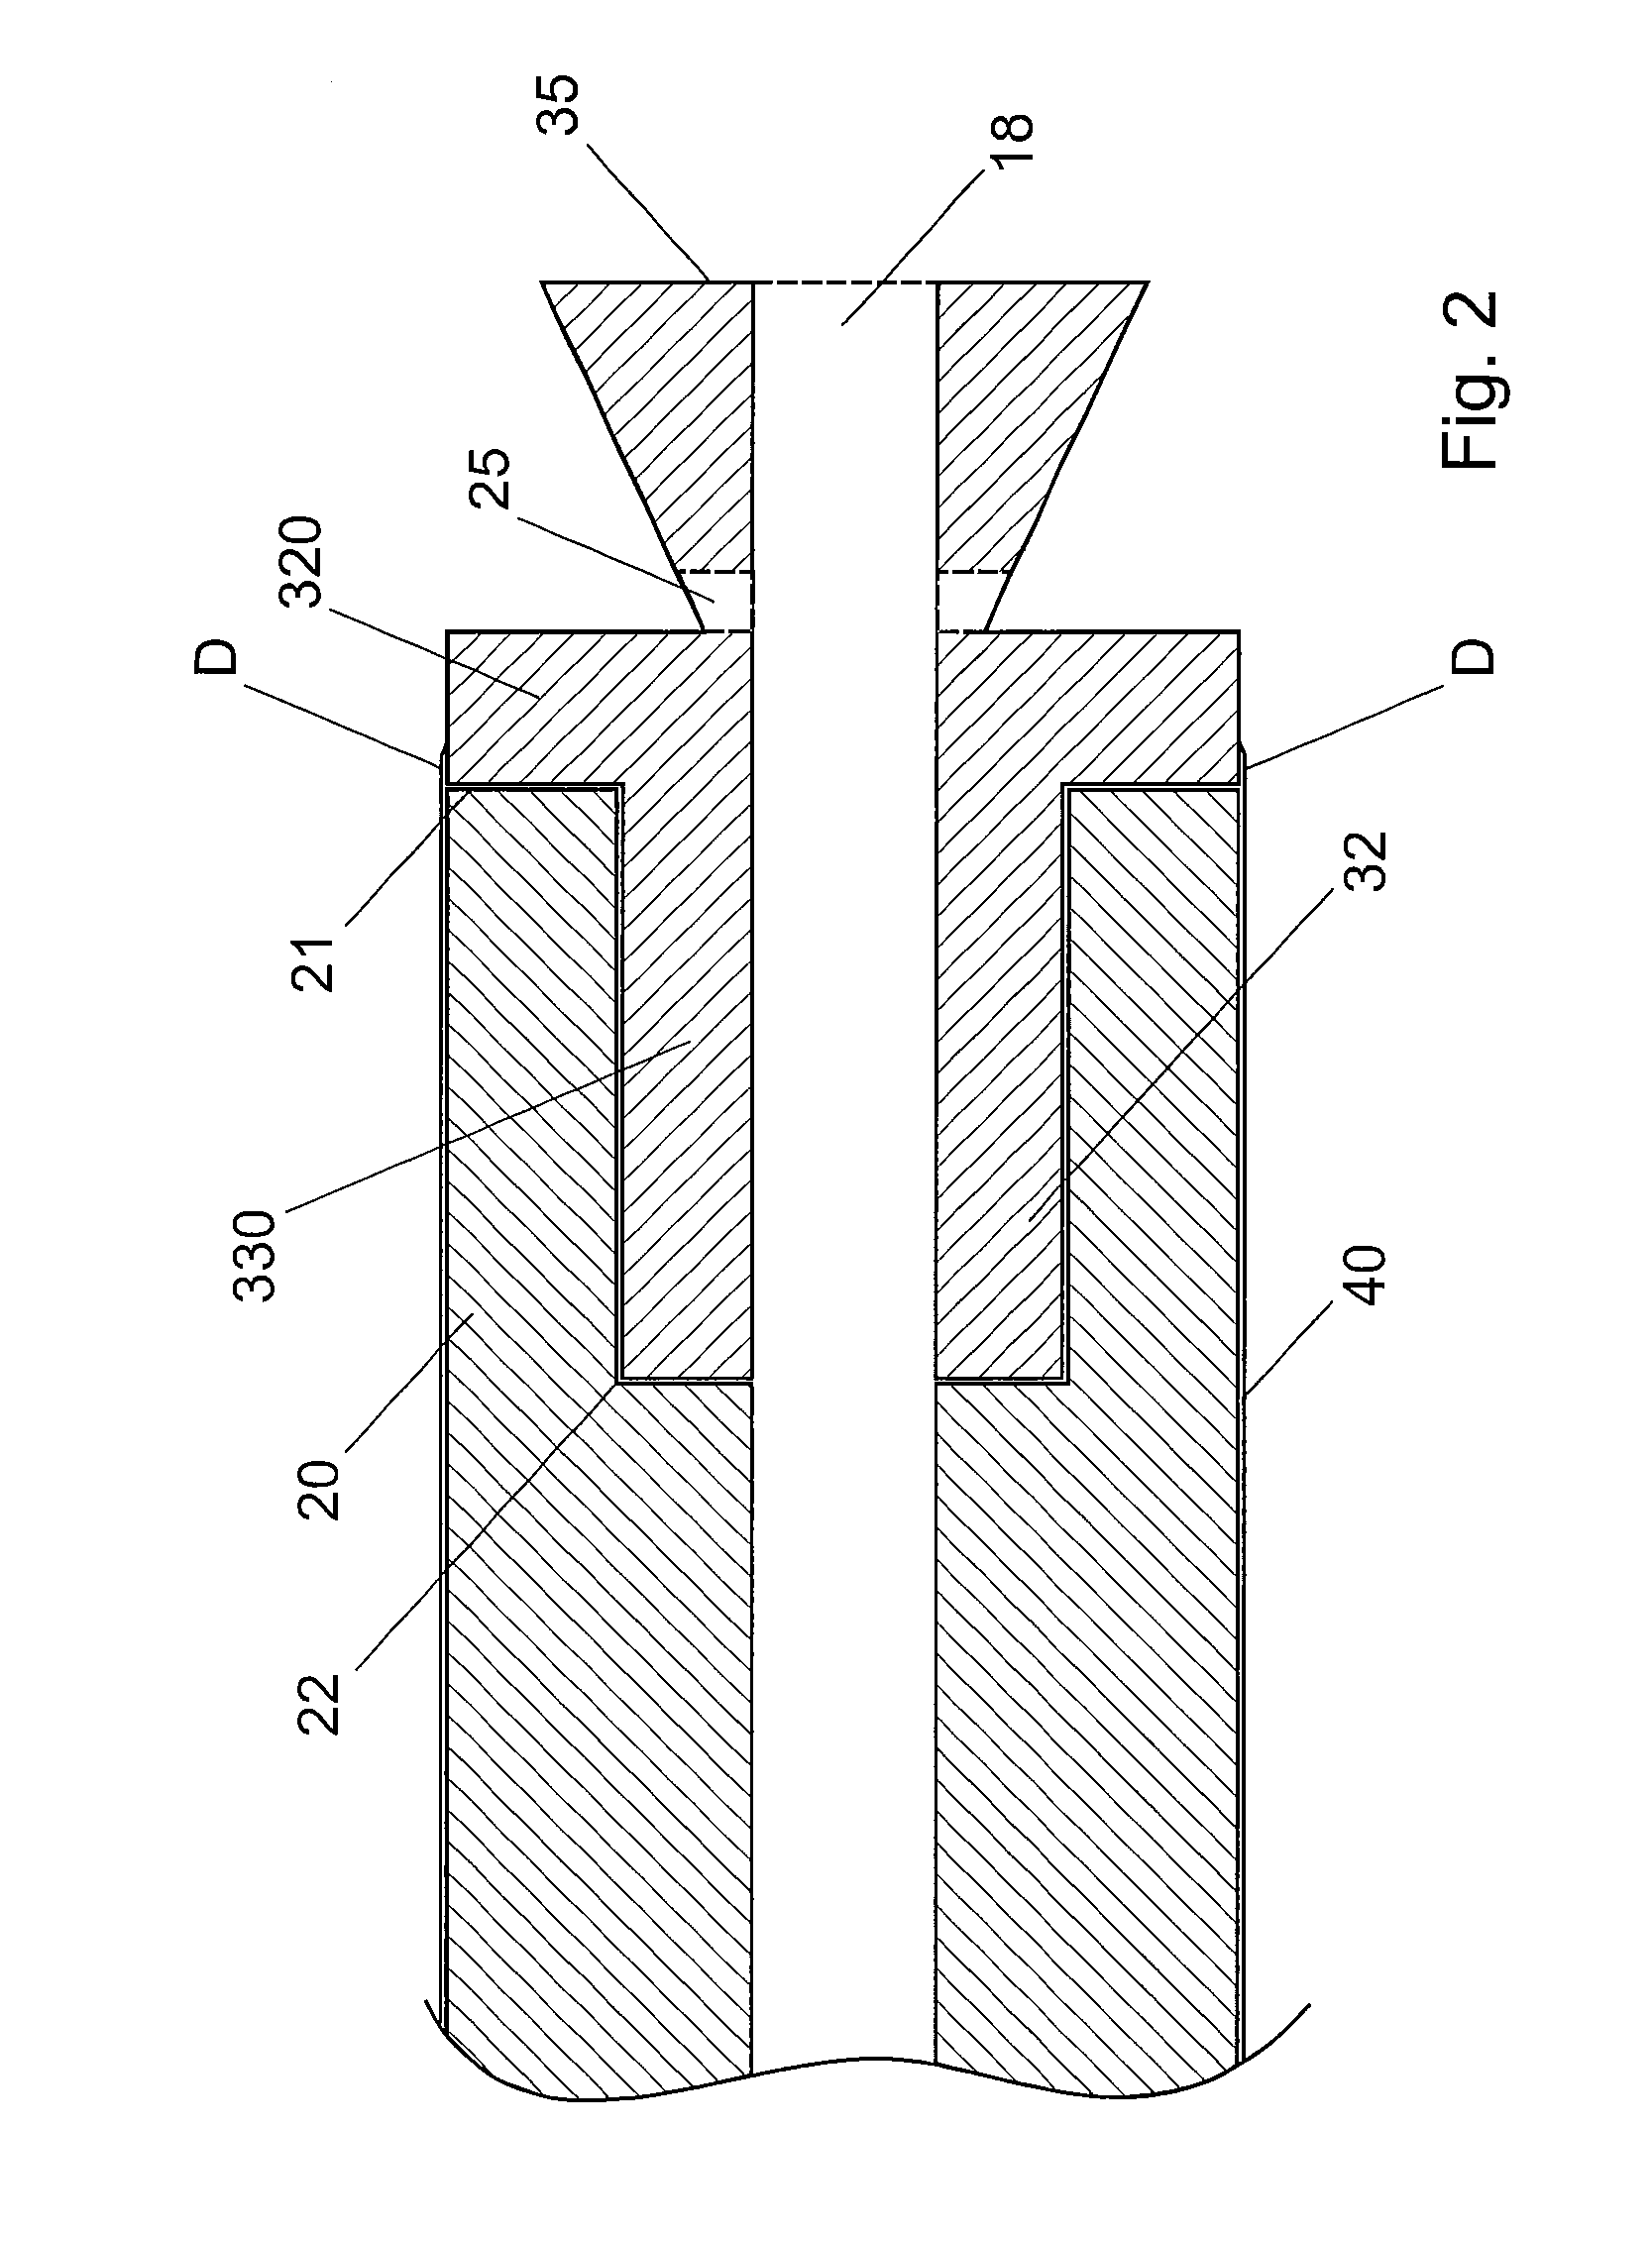 Drive shaft for a surgical reamer